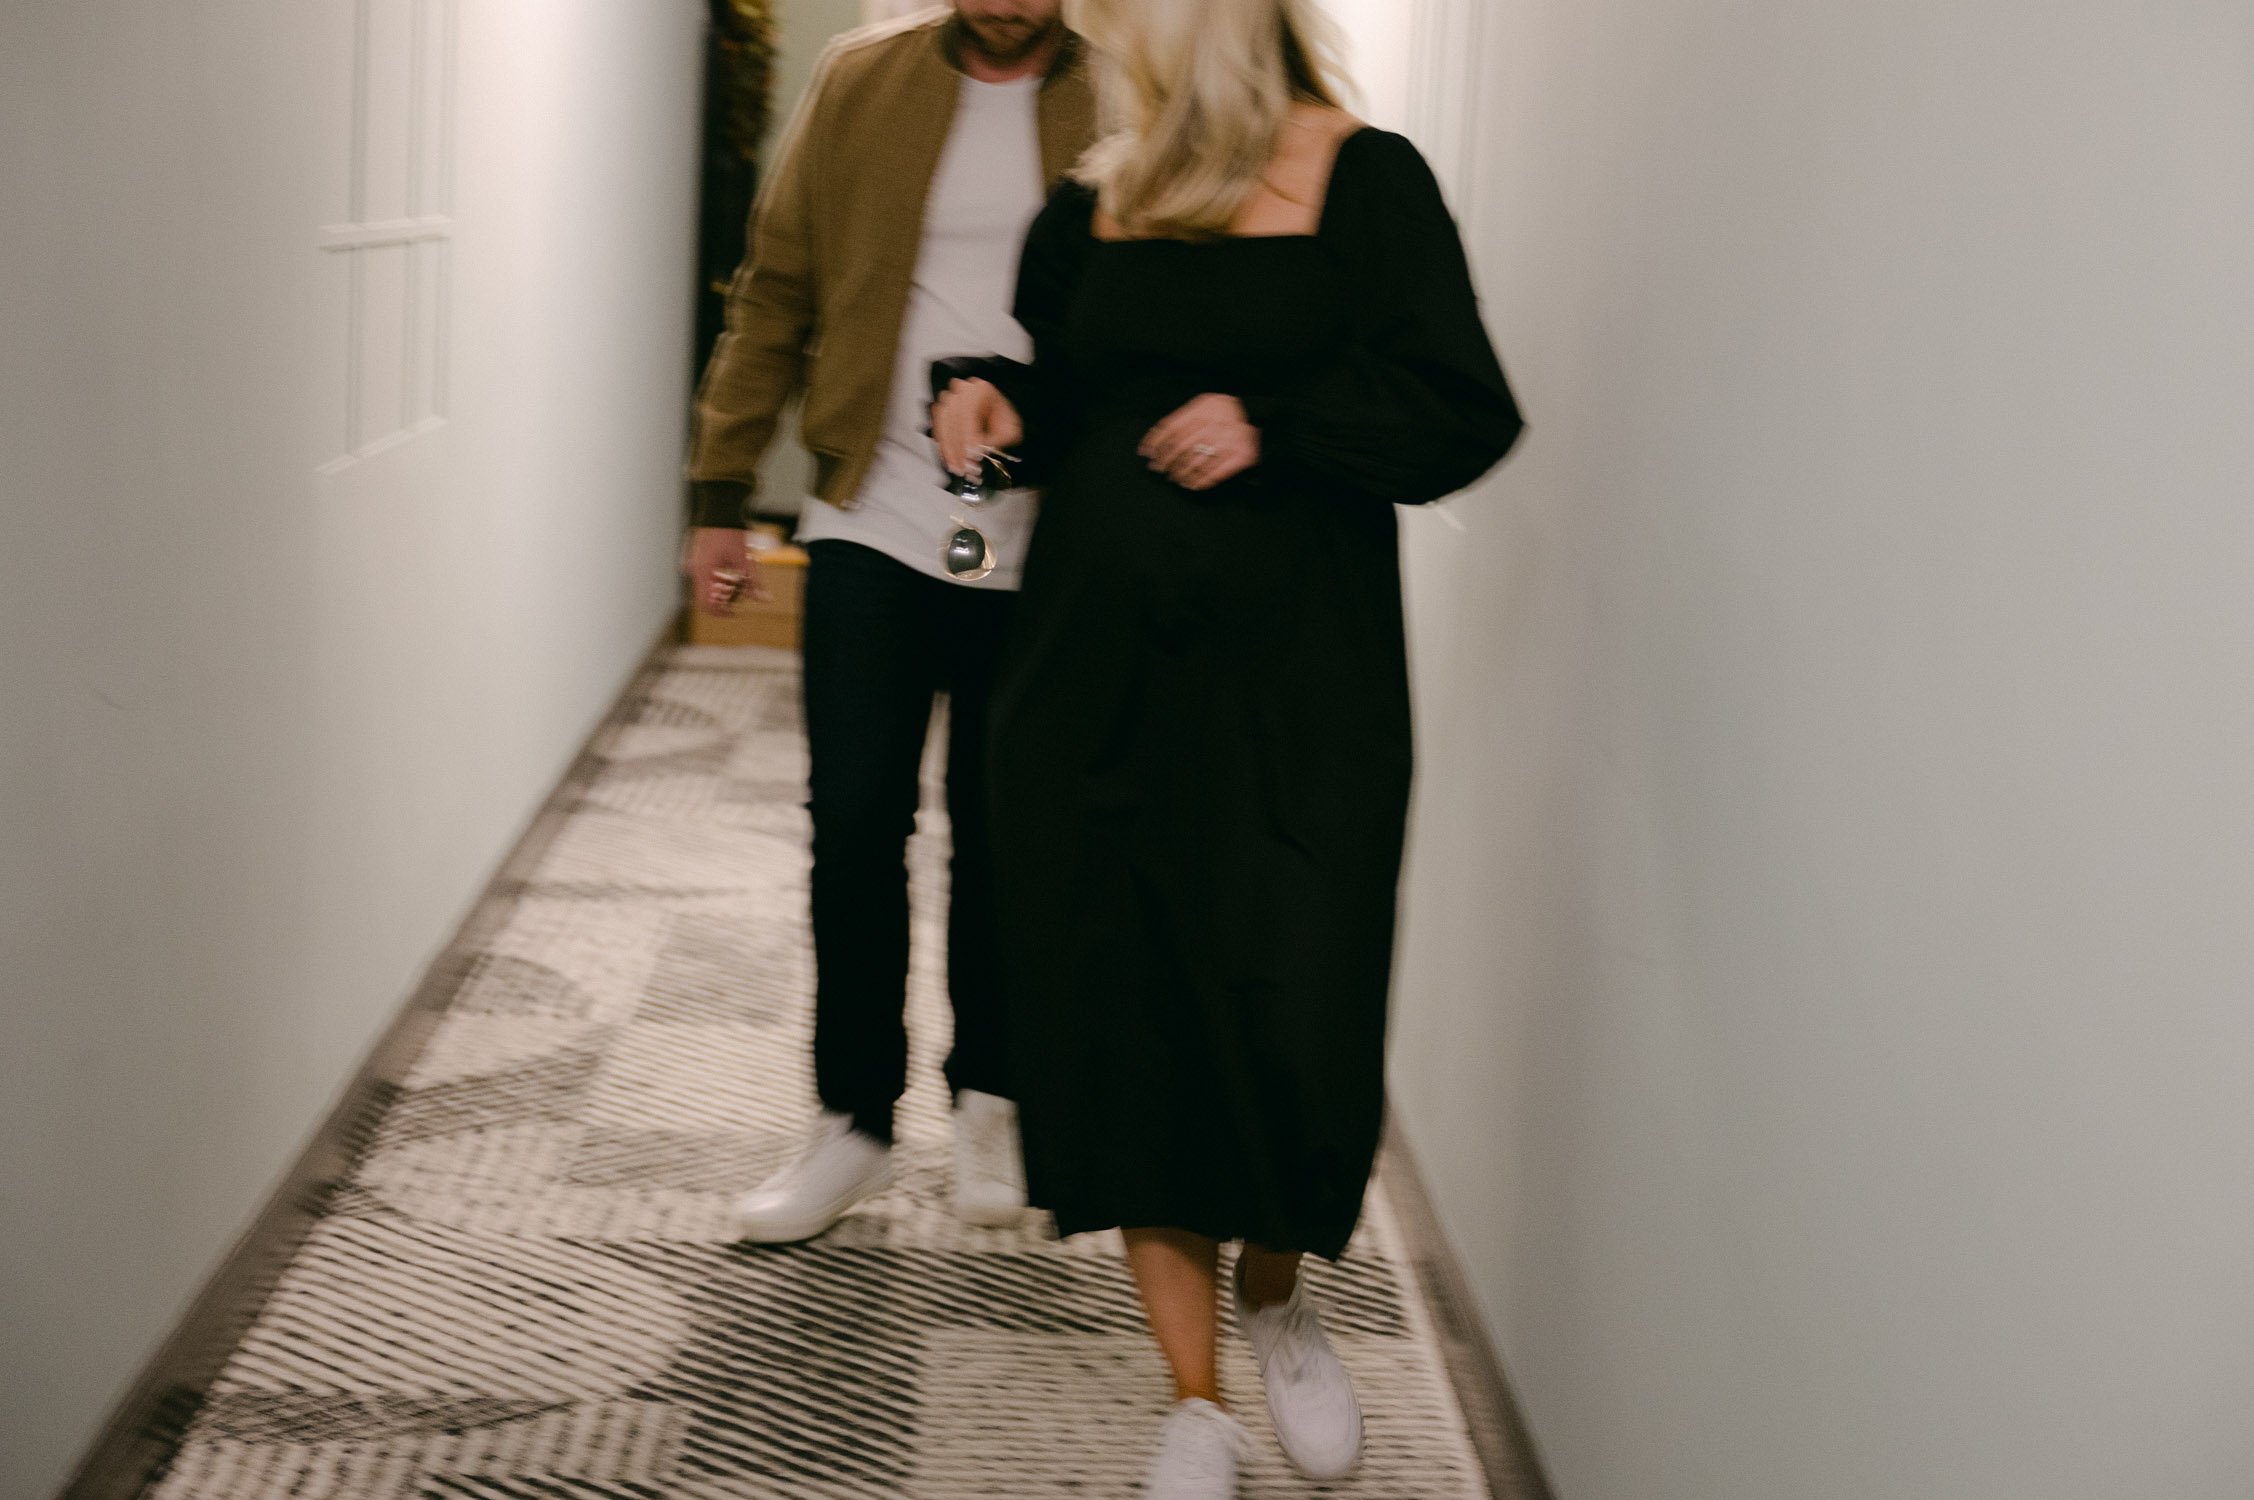 san francisco maternity session, photo of couple leaving their apartment, mom-to-be is wearing a black dress with white tennis shoes and dad is wearing a tan jacket.